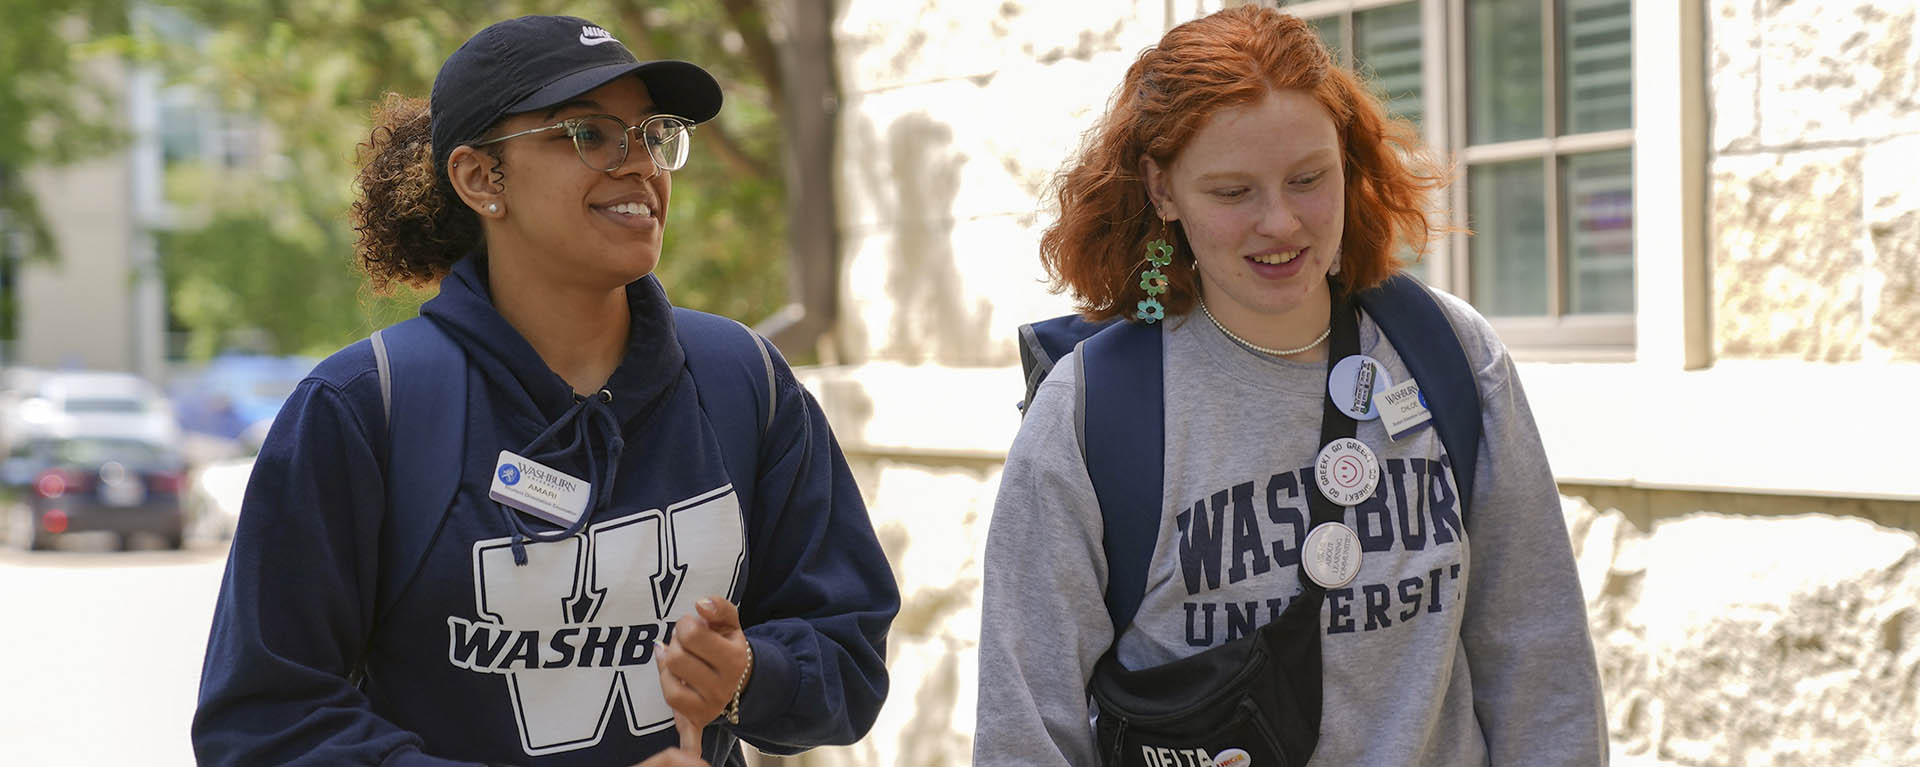 Two students wearing Washburn gear smile and talk while walking.